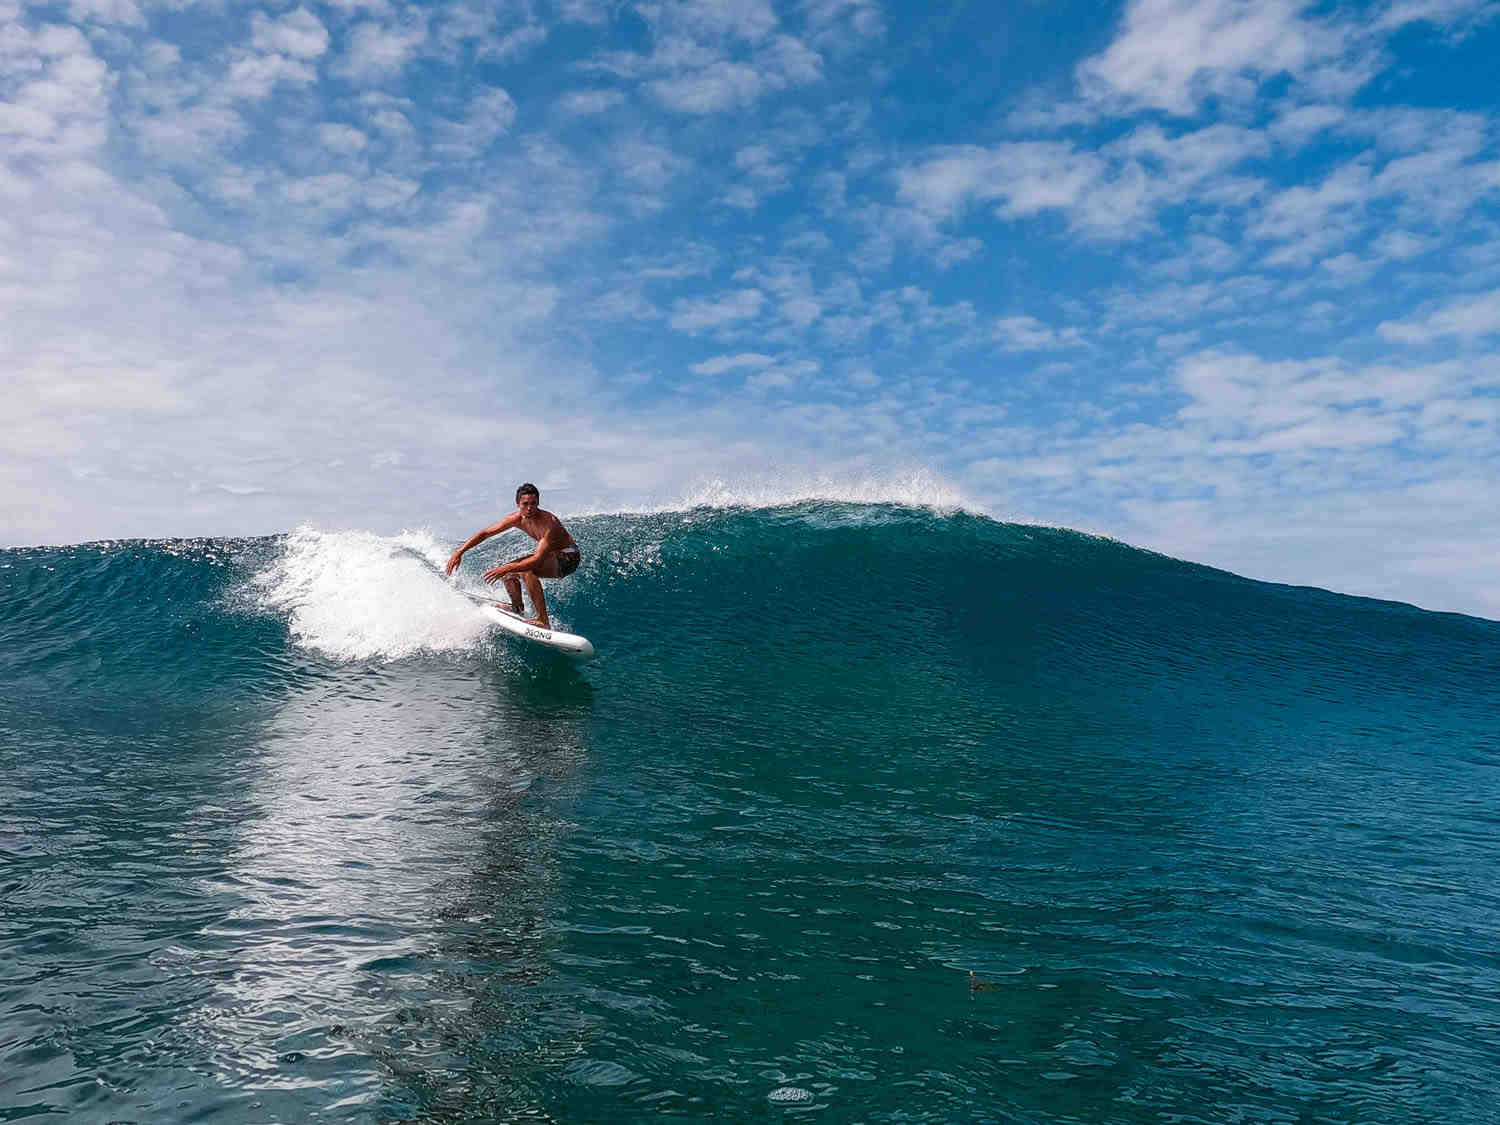 How hard is learning to surf?